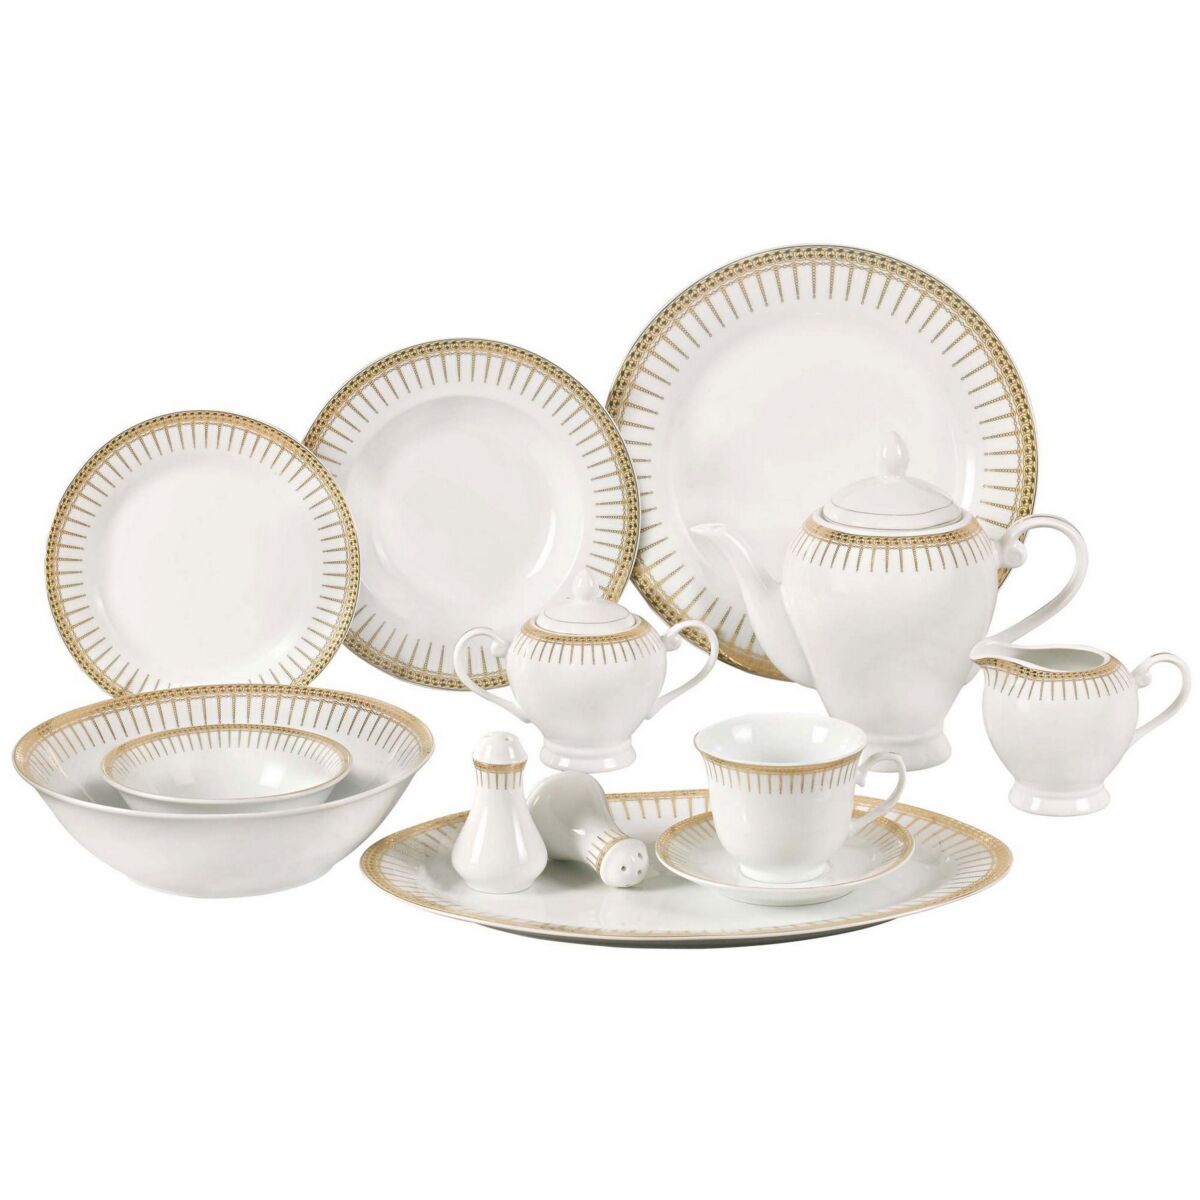 Lorren Home Trends Aria 57-pc Dinnerware Set, Service for 8 - Gold